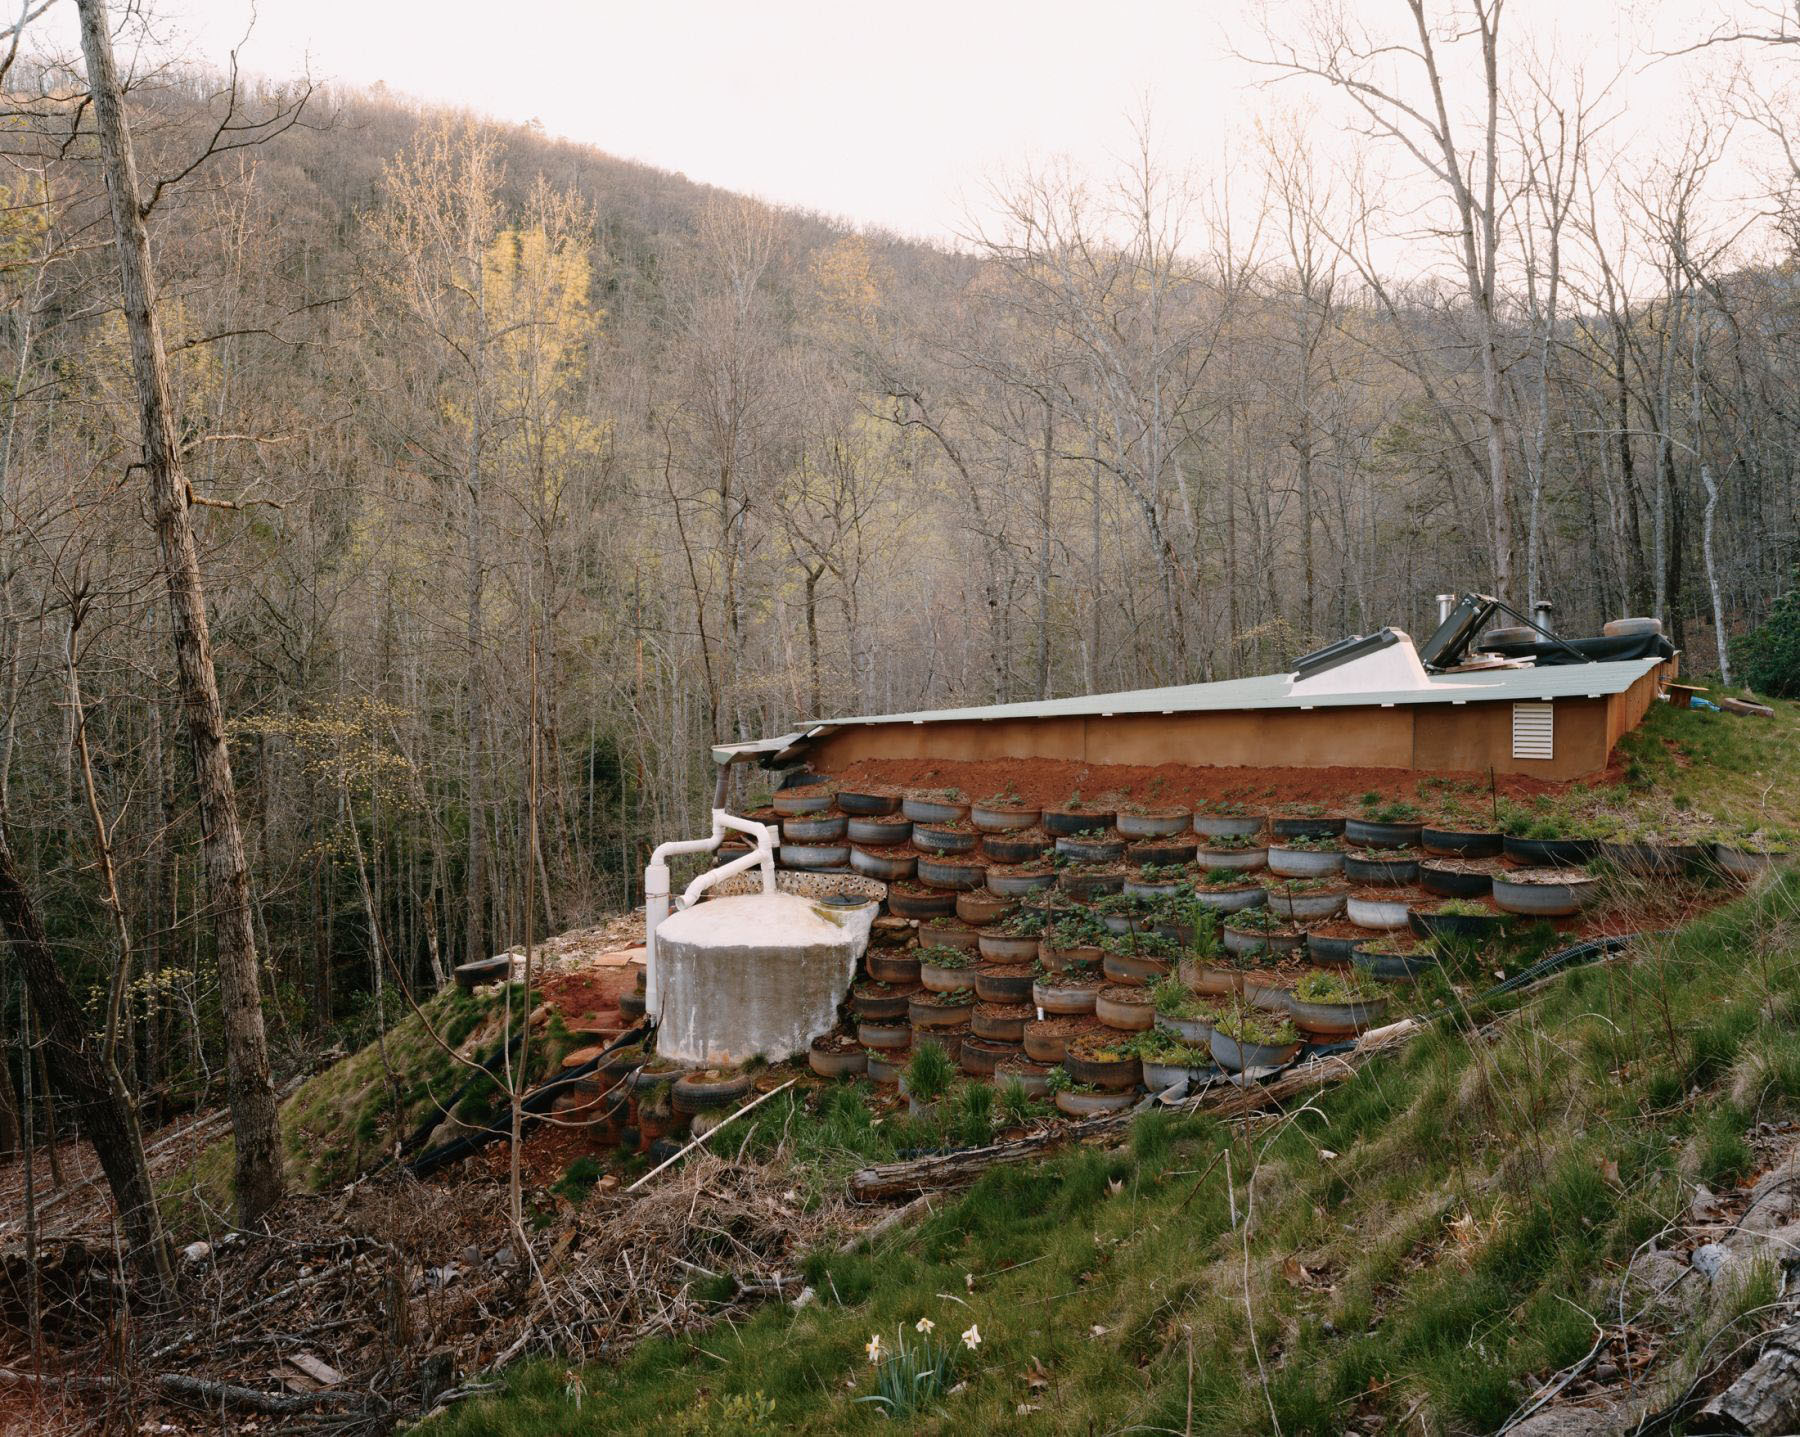 An Earthship at Earthaven Ecovillage, Black Mountain, North Carolina, April 2005